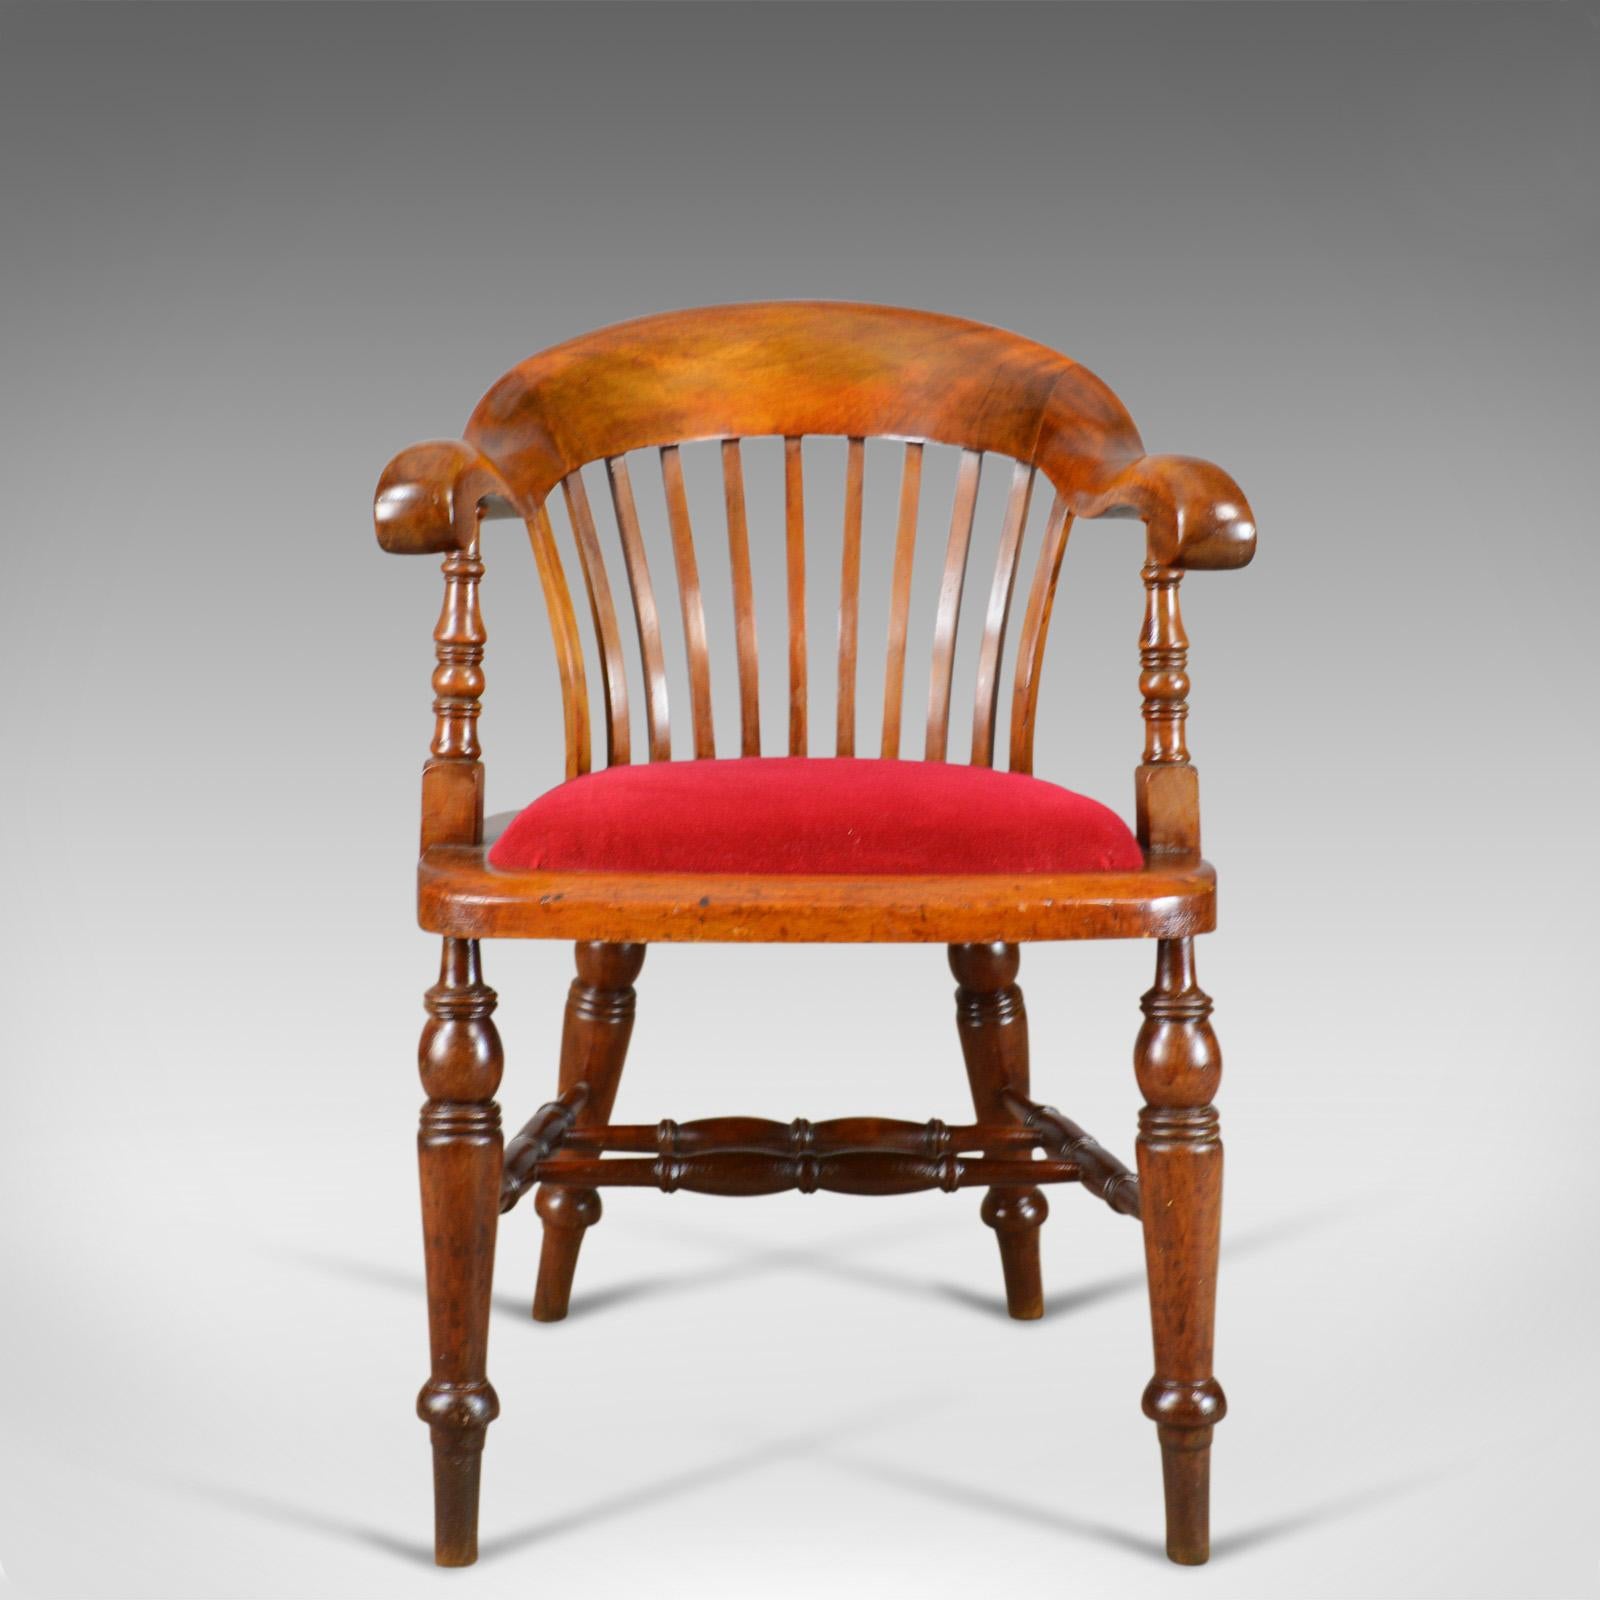 This is an antique bow-back armchair, an English, High Wycombe, mahogany, 'smokers', or 'captains', chair by R. Tyzack and dating to the reign of George V in the early 20th century, circa 1910.

A superior quality bow back armchair
Grain interest